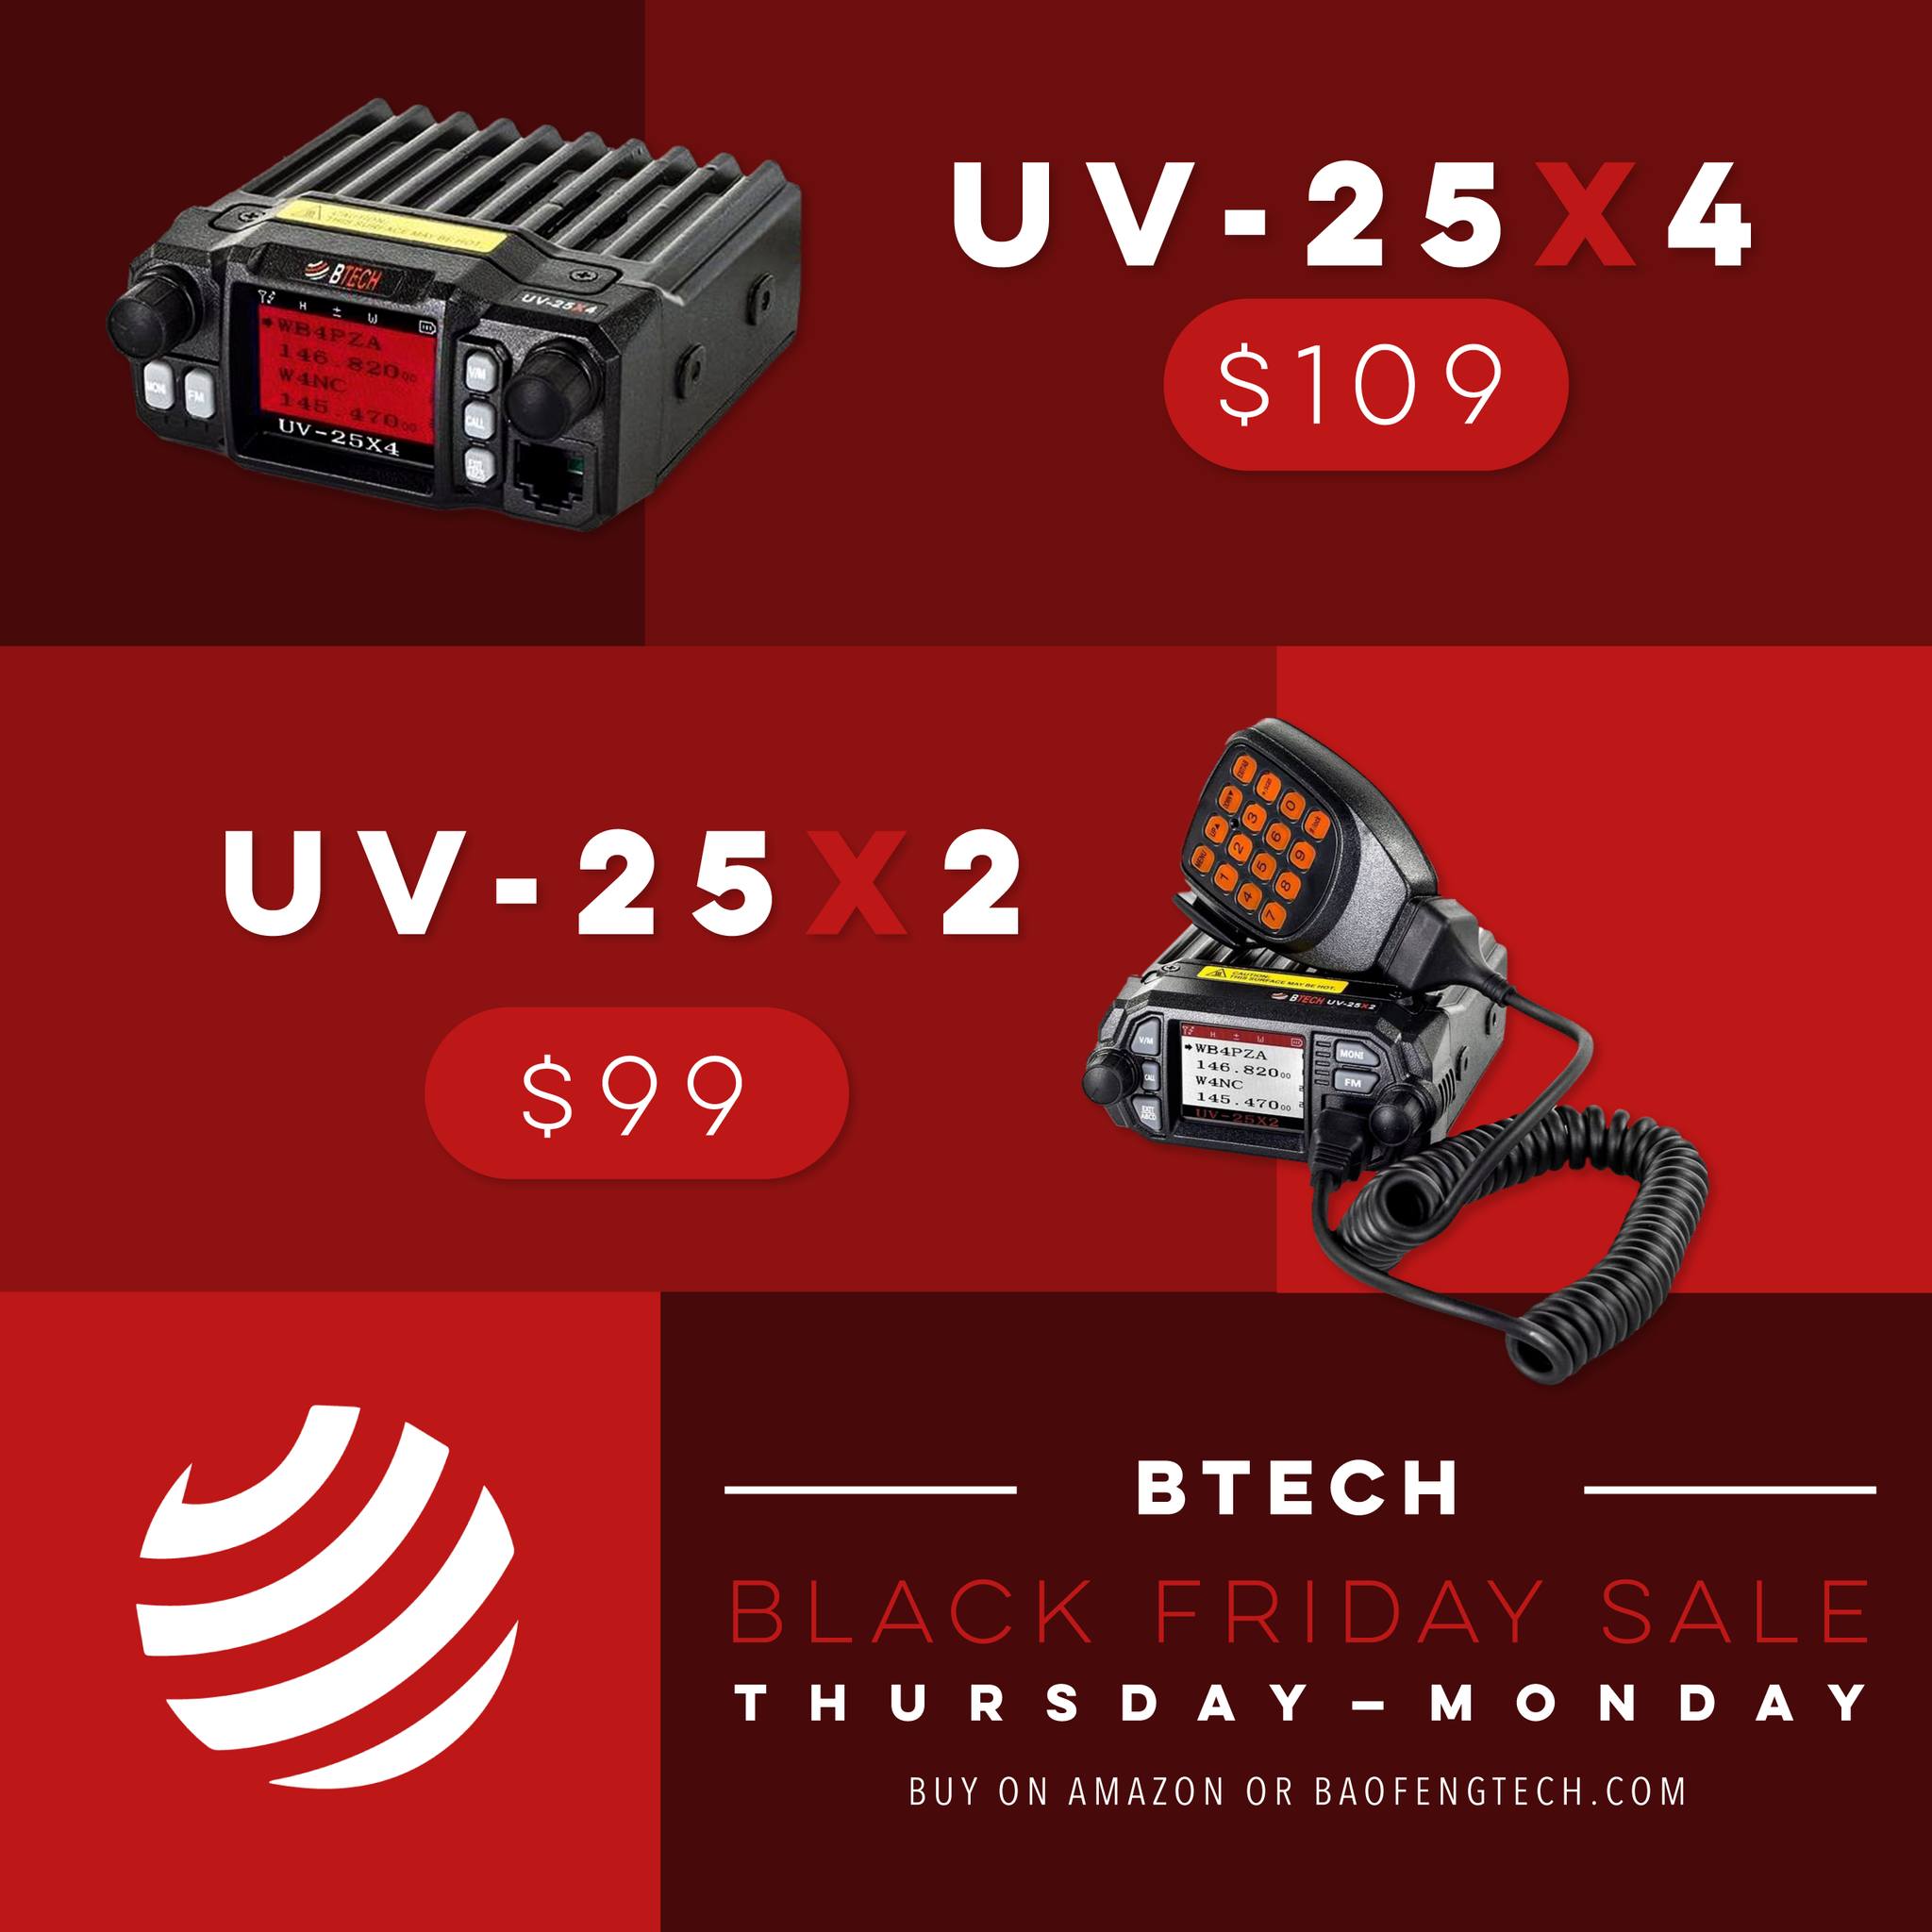 These are the lowest prices you are going to find for the UV-25X2 and the UV-25X4. Starting at $99, you will regret missing out on a deal like this.  #blackfriday #sale #deals #uv #uv25x #radio #hamradio #mobileradio #mobile #onthego #prep #survival #btech #holidays